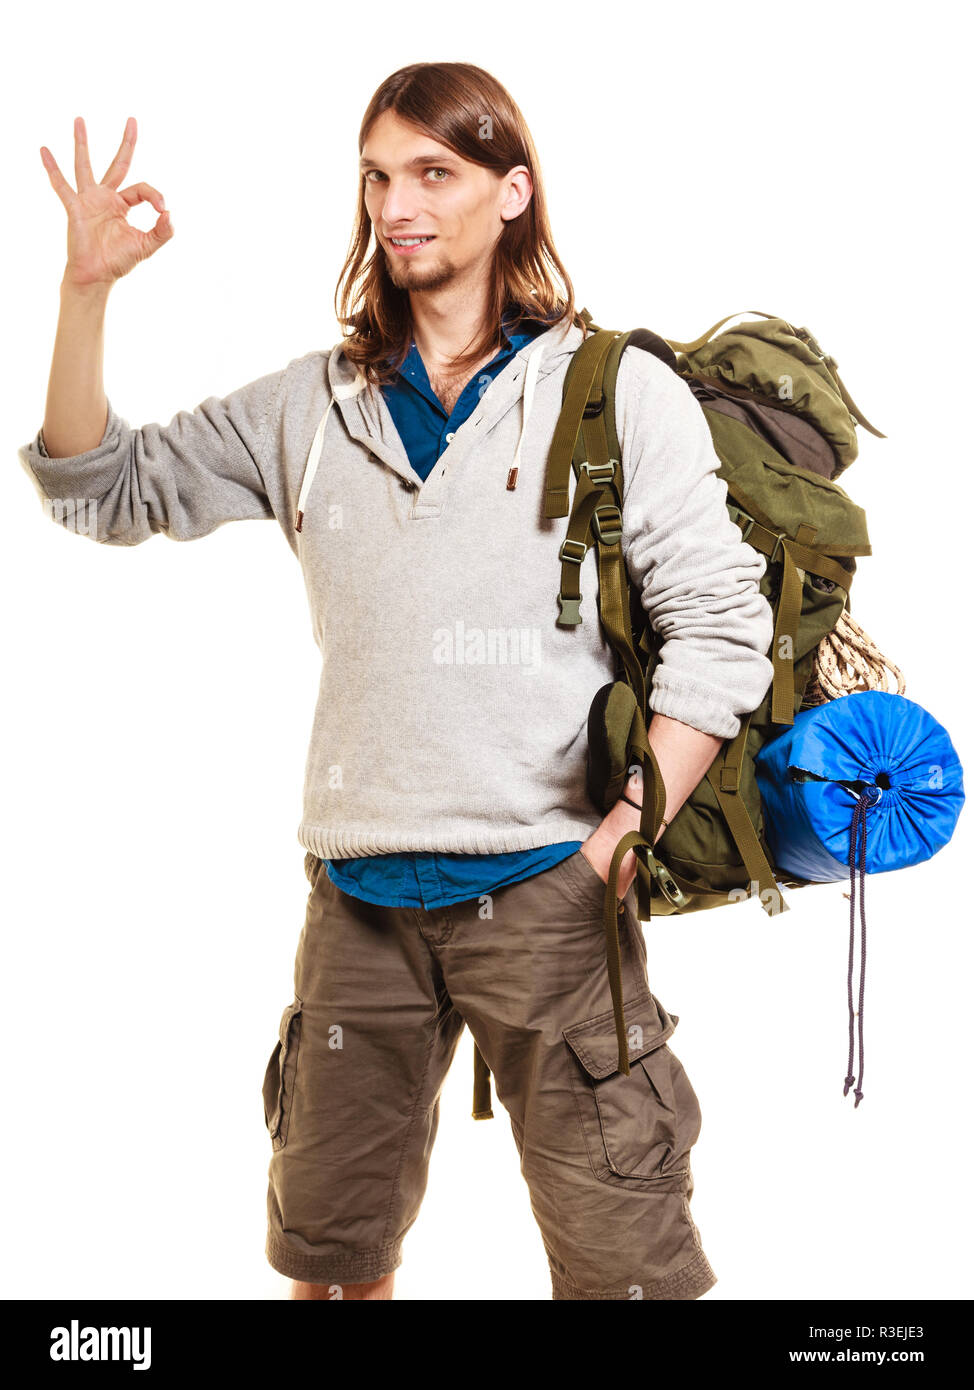 Portrait of man tourist backpacker on trip showing ok gesture. Young guy hiker backpacking. Summer vacation travel. Isolated on white background. Stock Photo